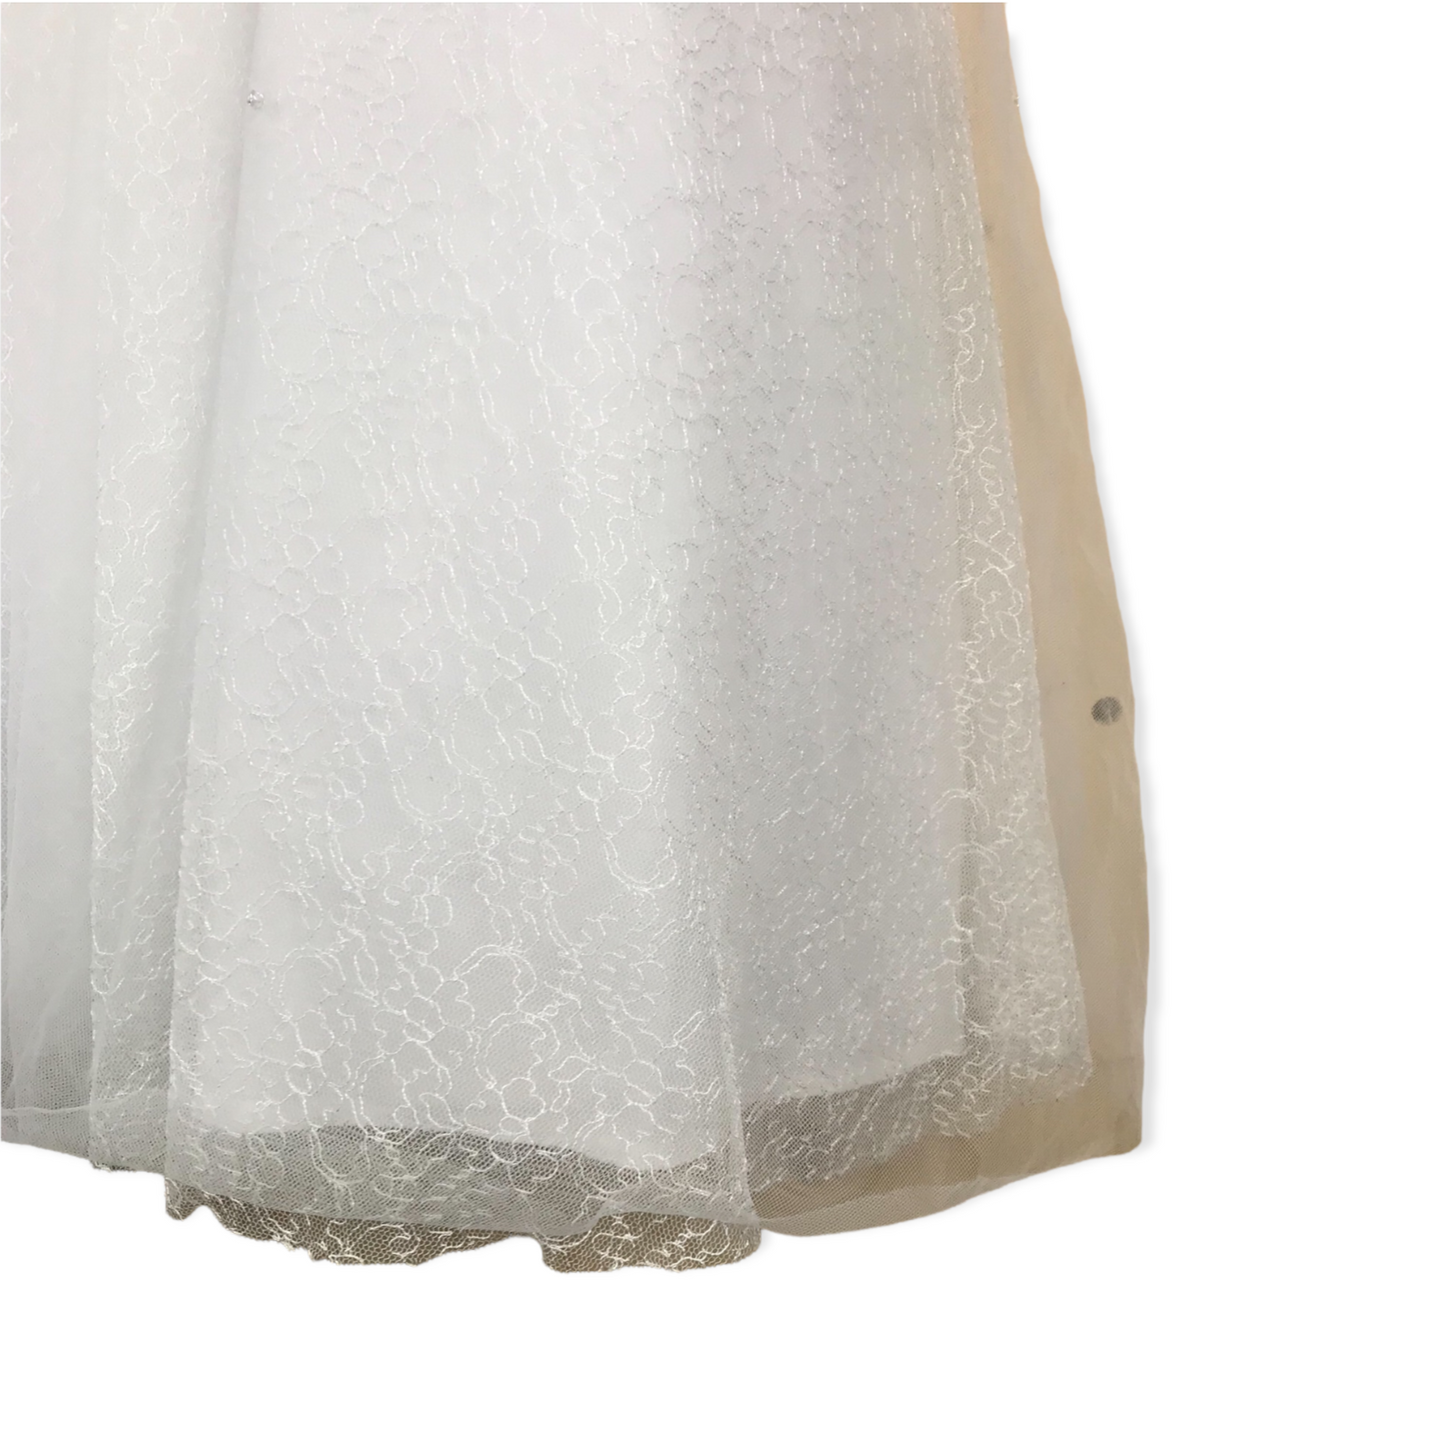 Jelly Totts White Tulle Layered Sequin Gem Detailed Formal Dress Age 10